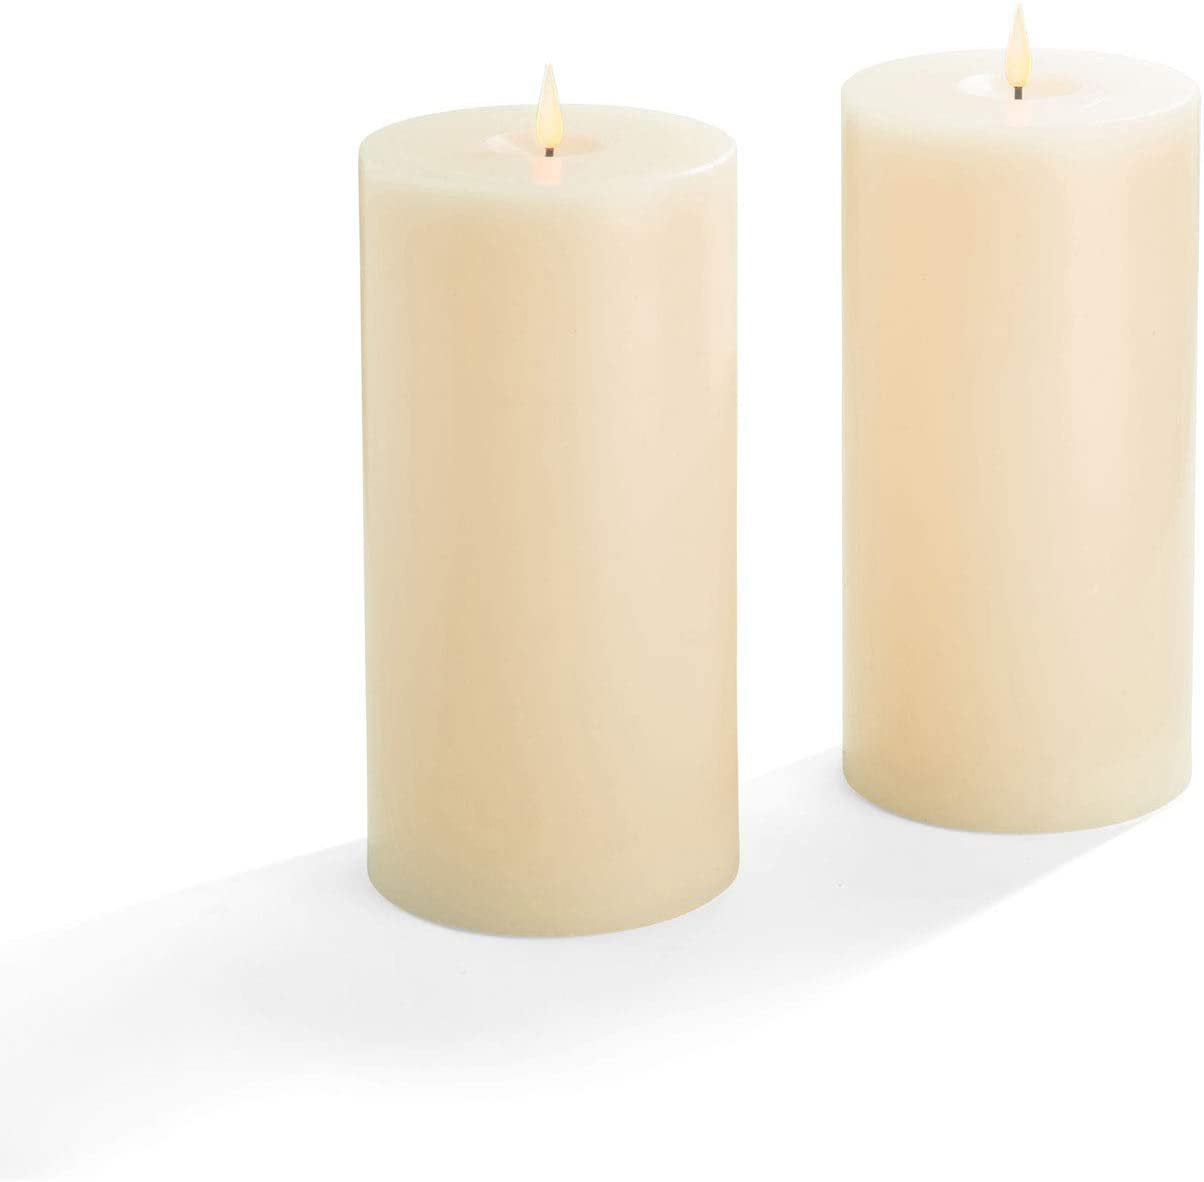 Set of 4 Warm White LED White Wax Melted Edge Flameless Candles 3” x 8” Pillar Candle Batteries Included LampLust LC004633 